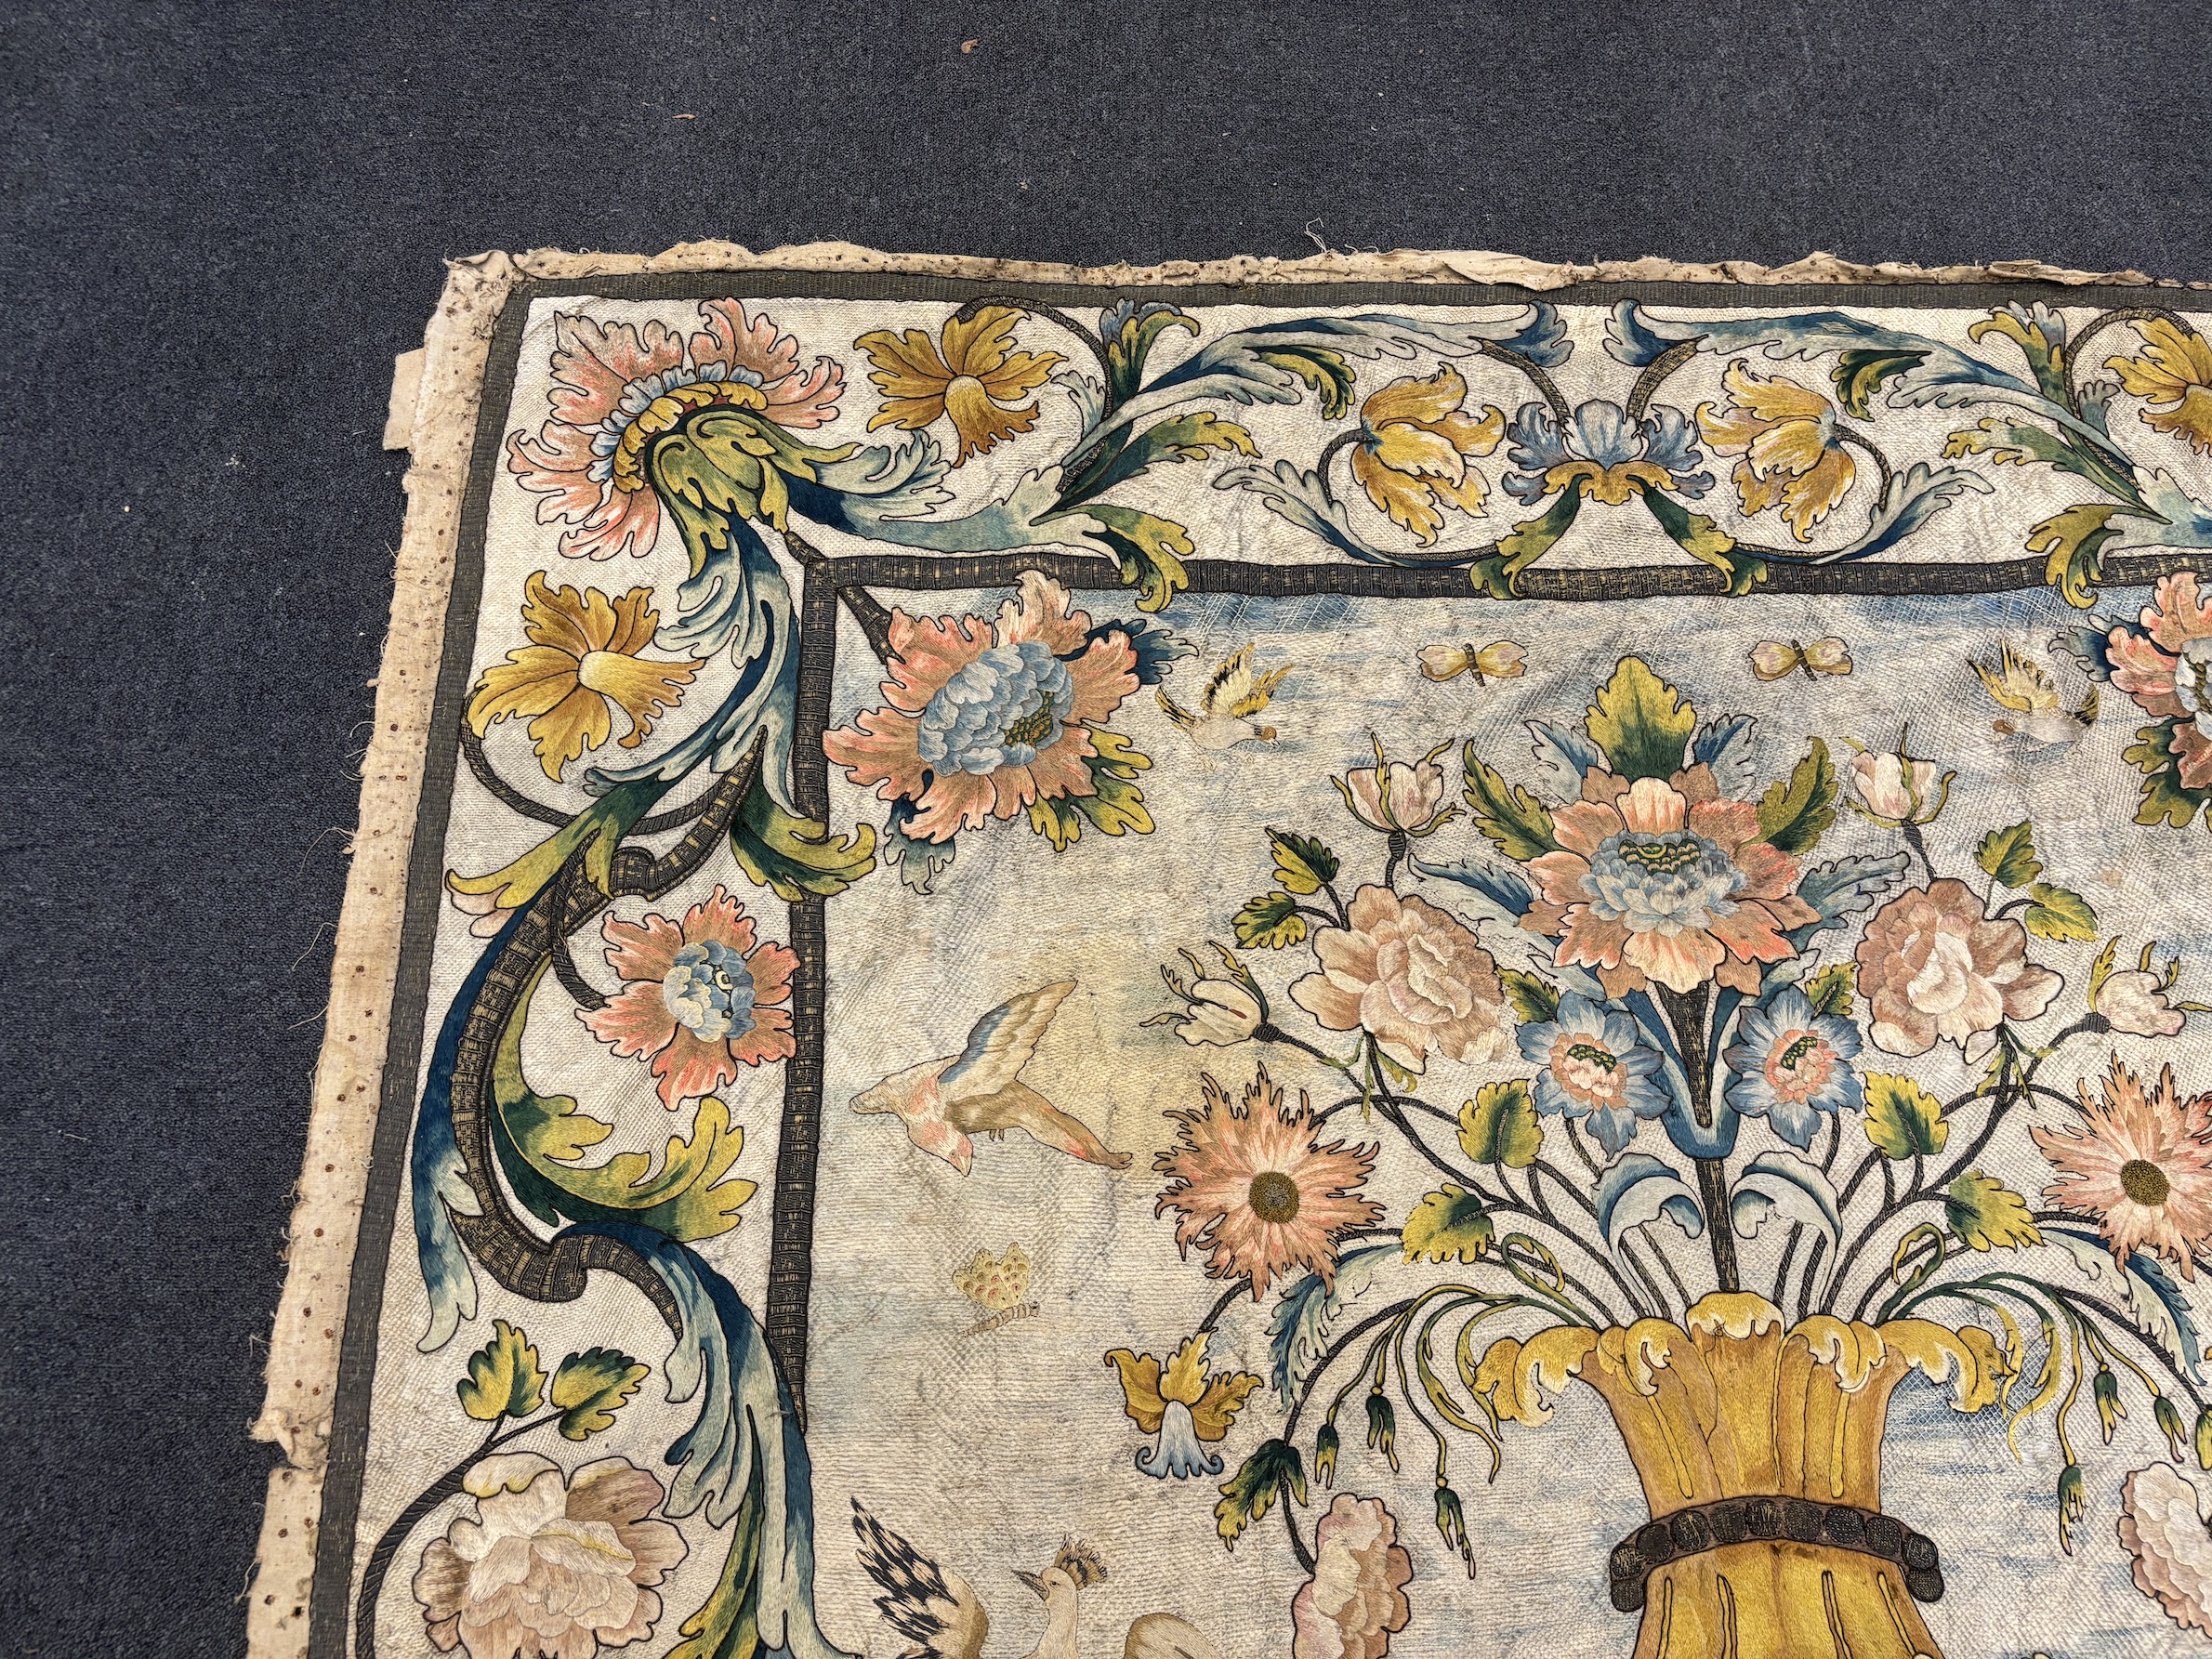 A large early 18th century possibly French polychrome and gold metallic silk embroidered wall hanging, with scrolling vine and floral border. The central motifs embroidered with an elaborate metallic thread cartouche fra